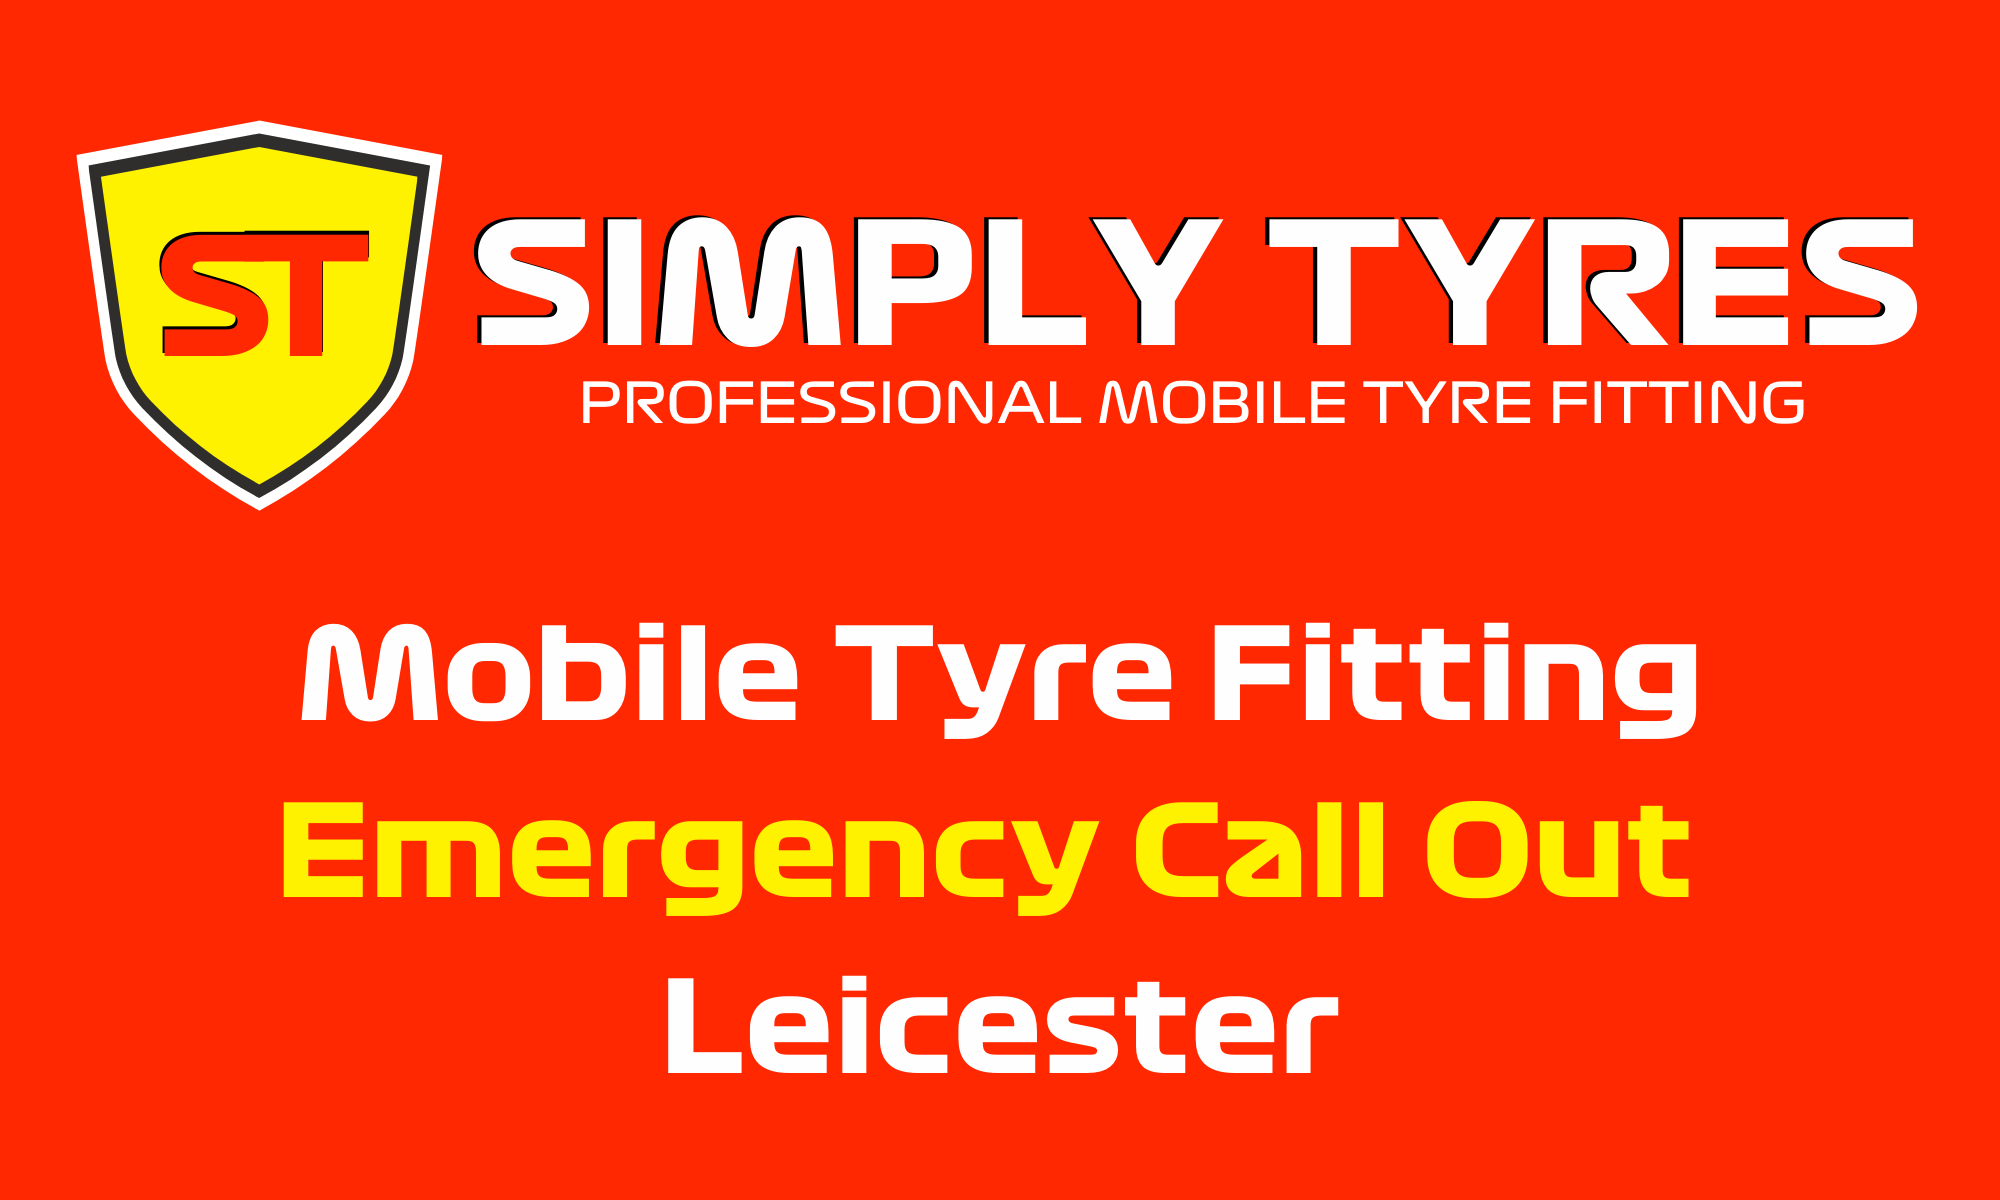 Mobile Tyre Fitting Blaby | 17th June 2021